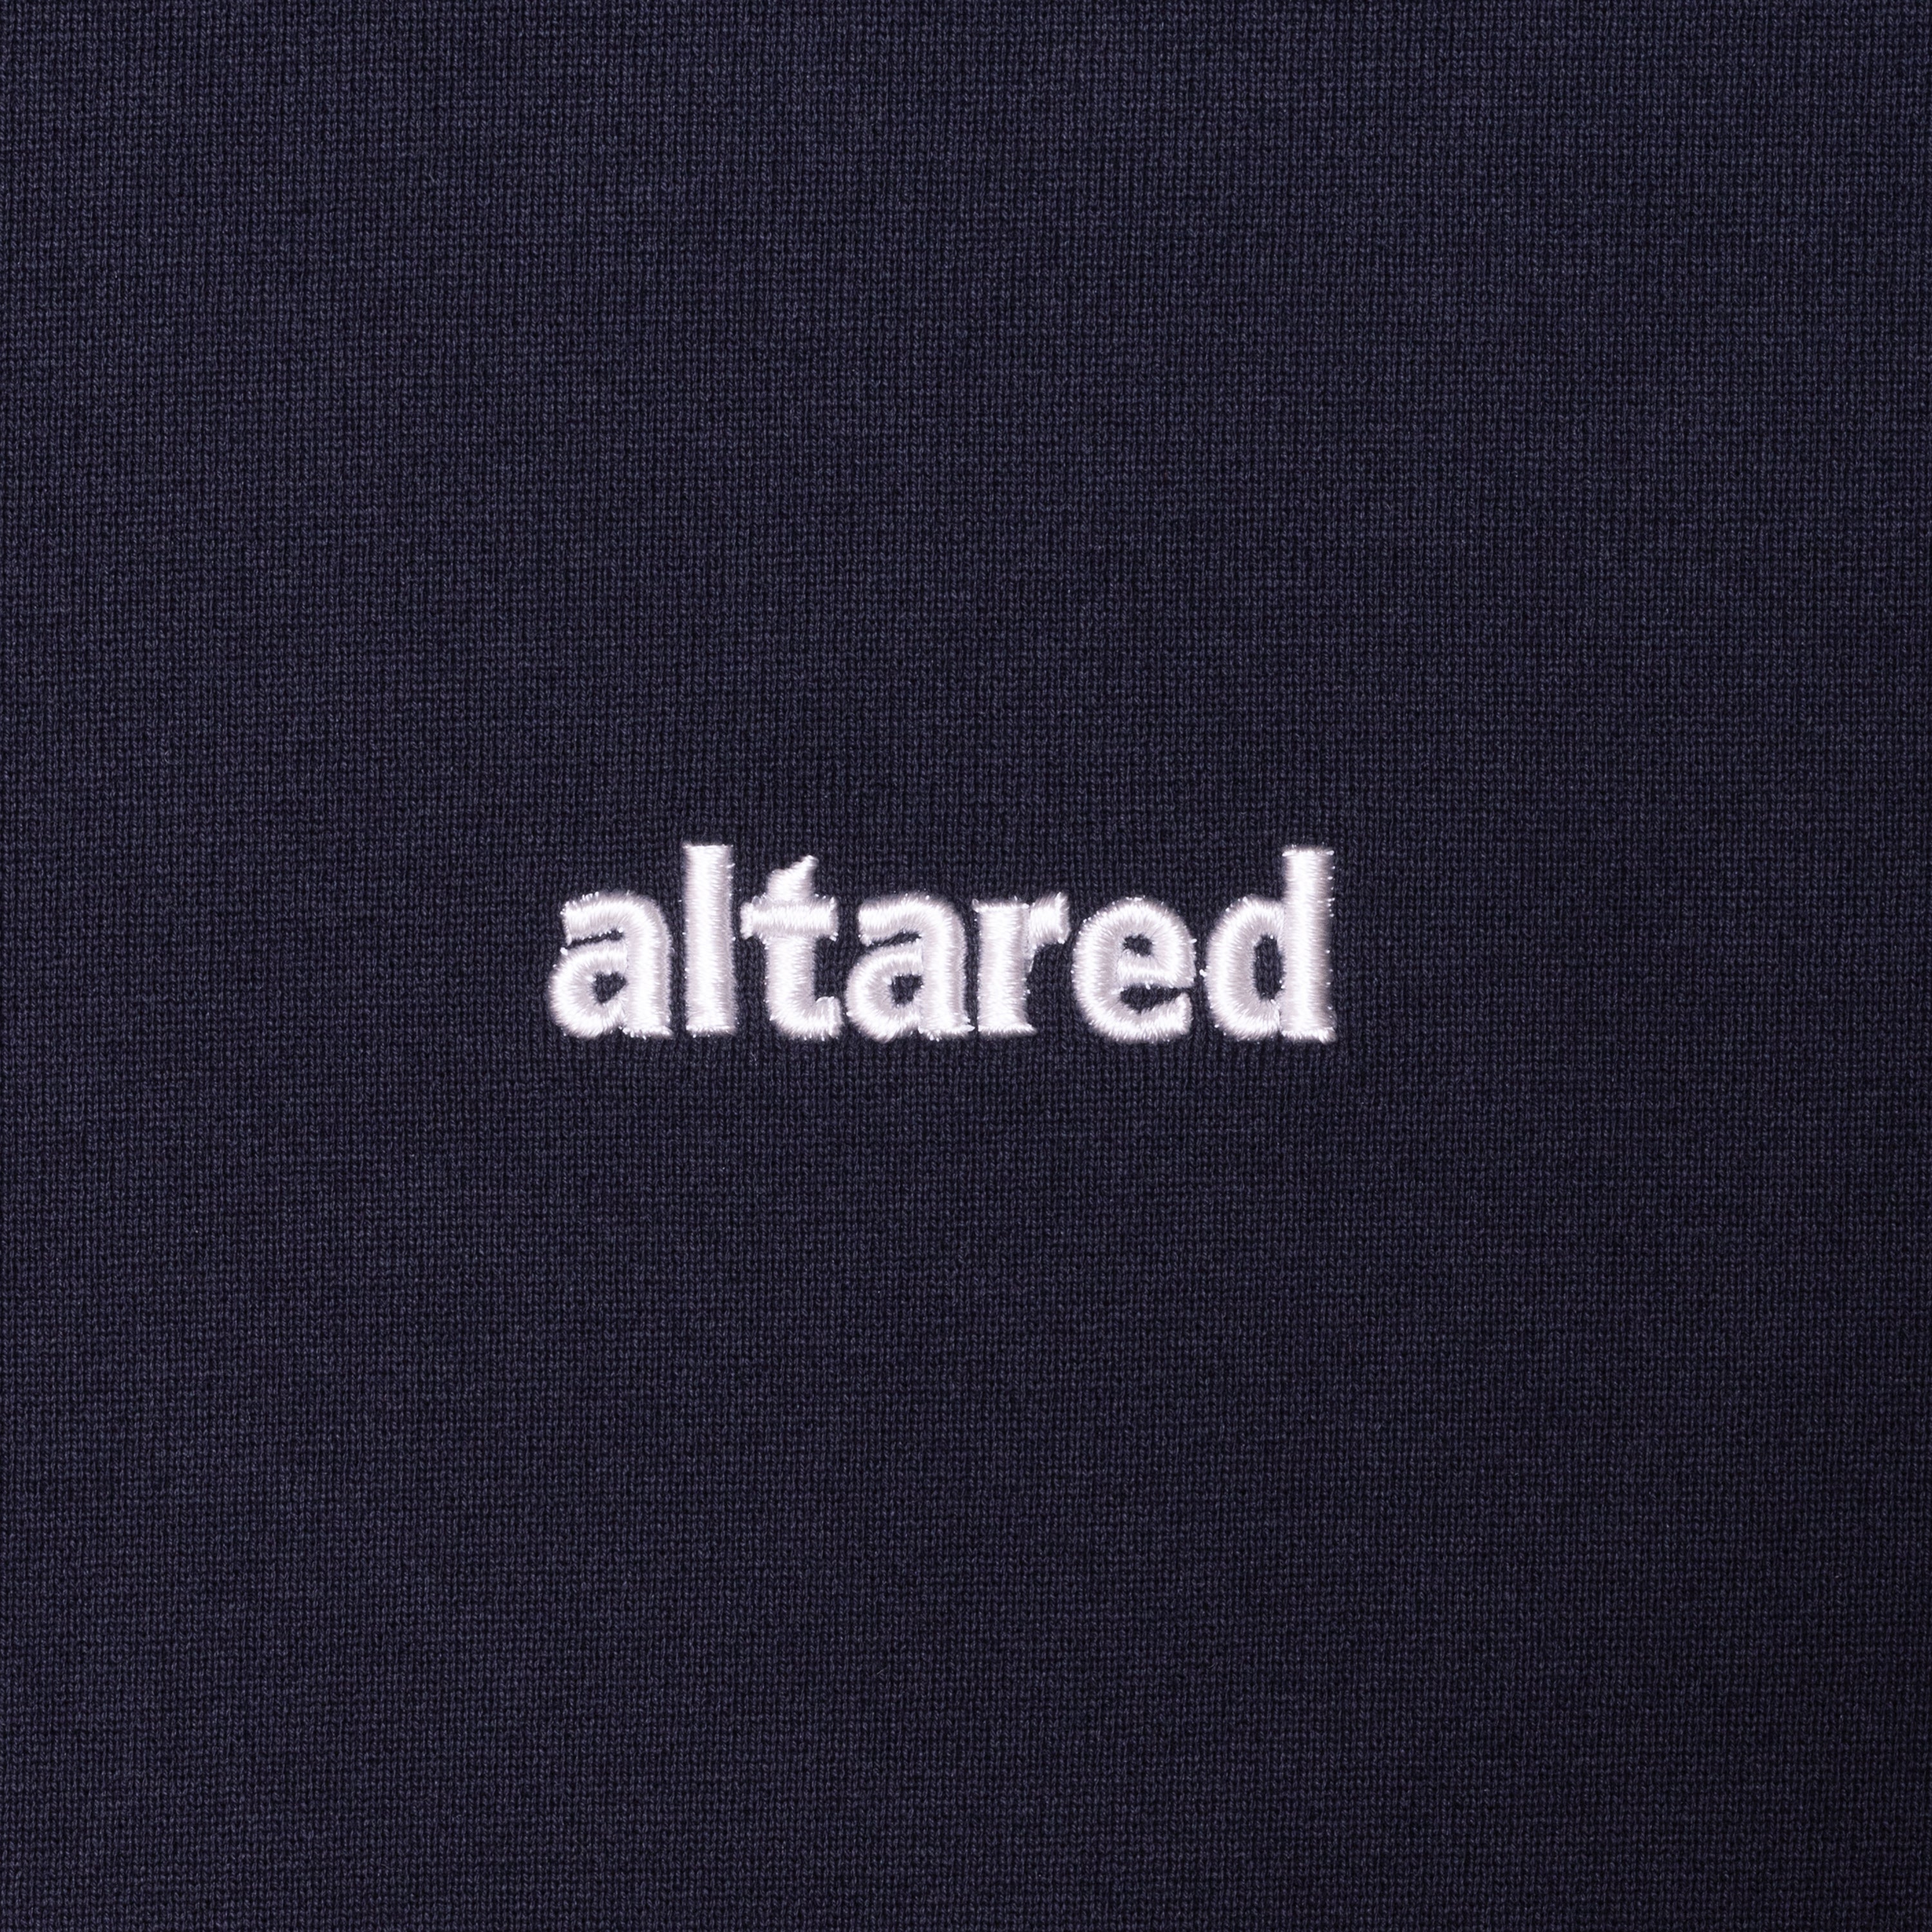 altared/Logo 3D Embroidery Hooded Sweat Shirt[NAVY]